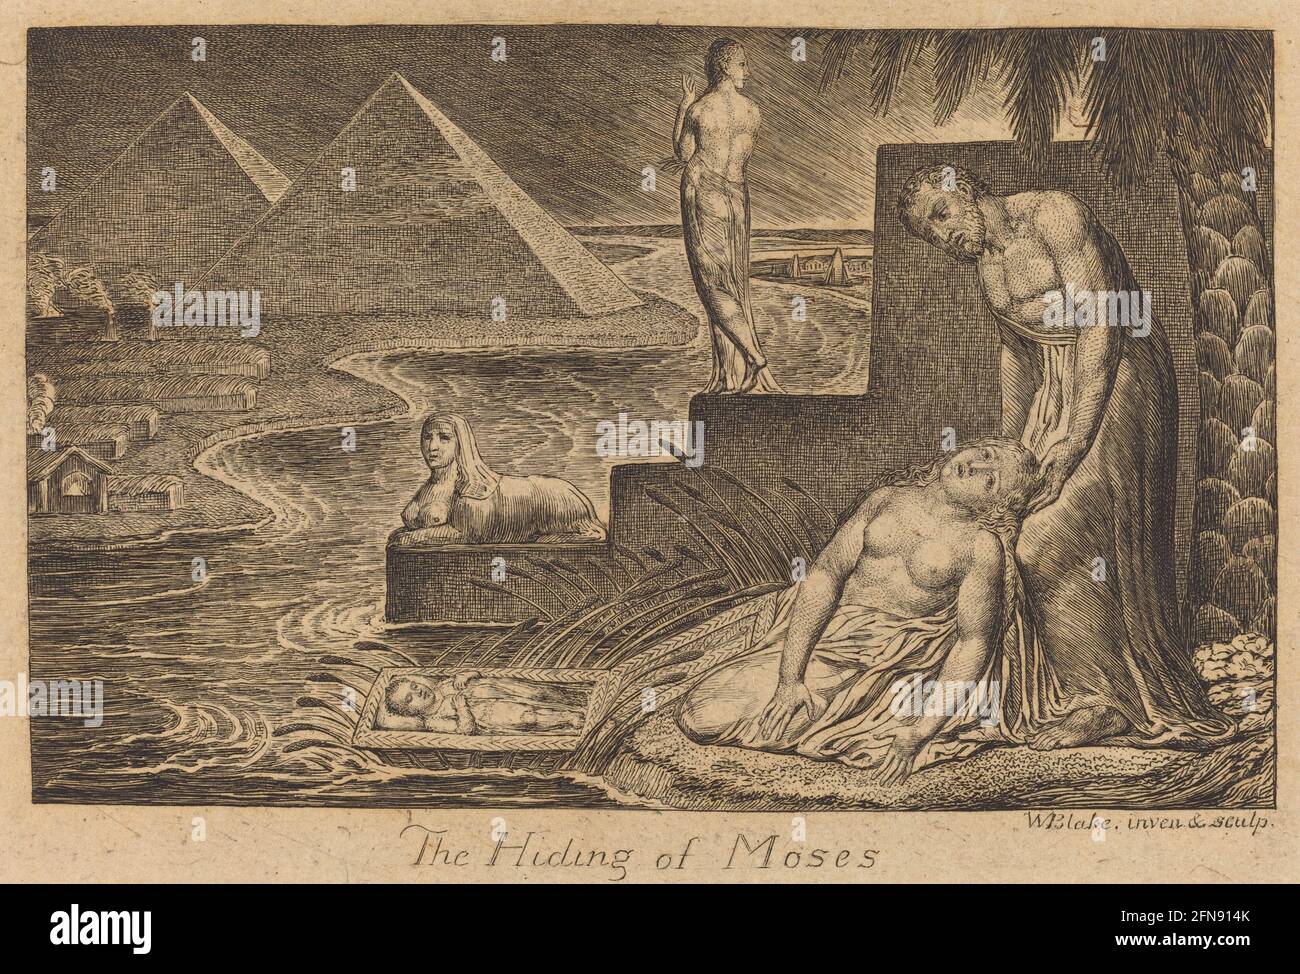 The Hiding of Moses, 1824. Stock Photo